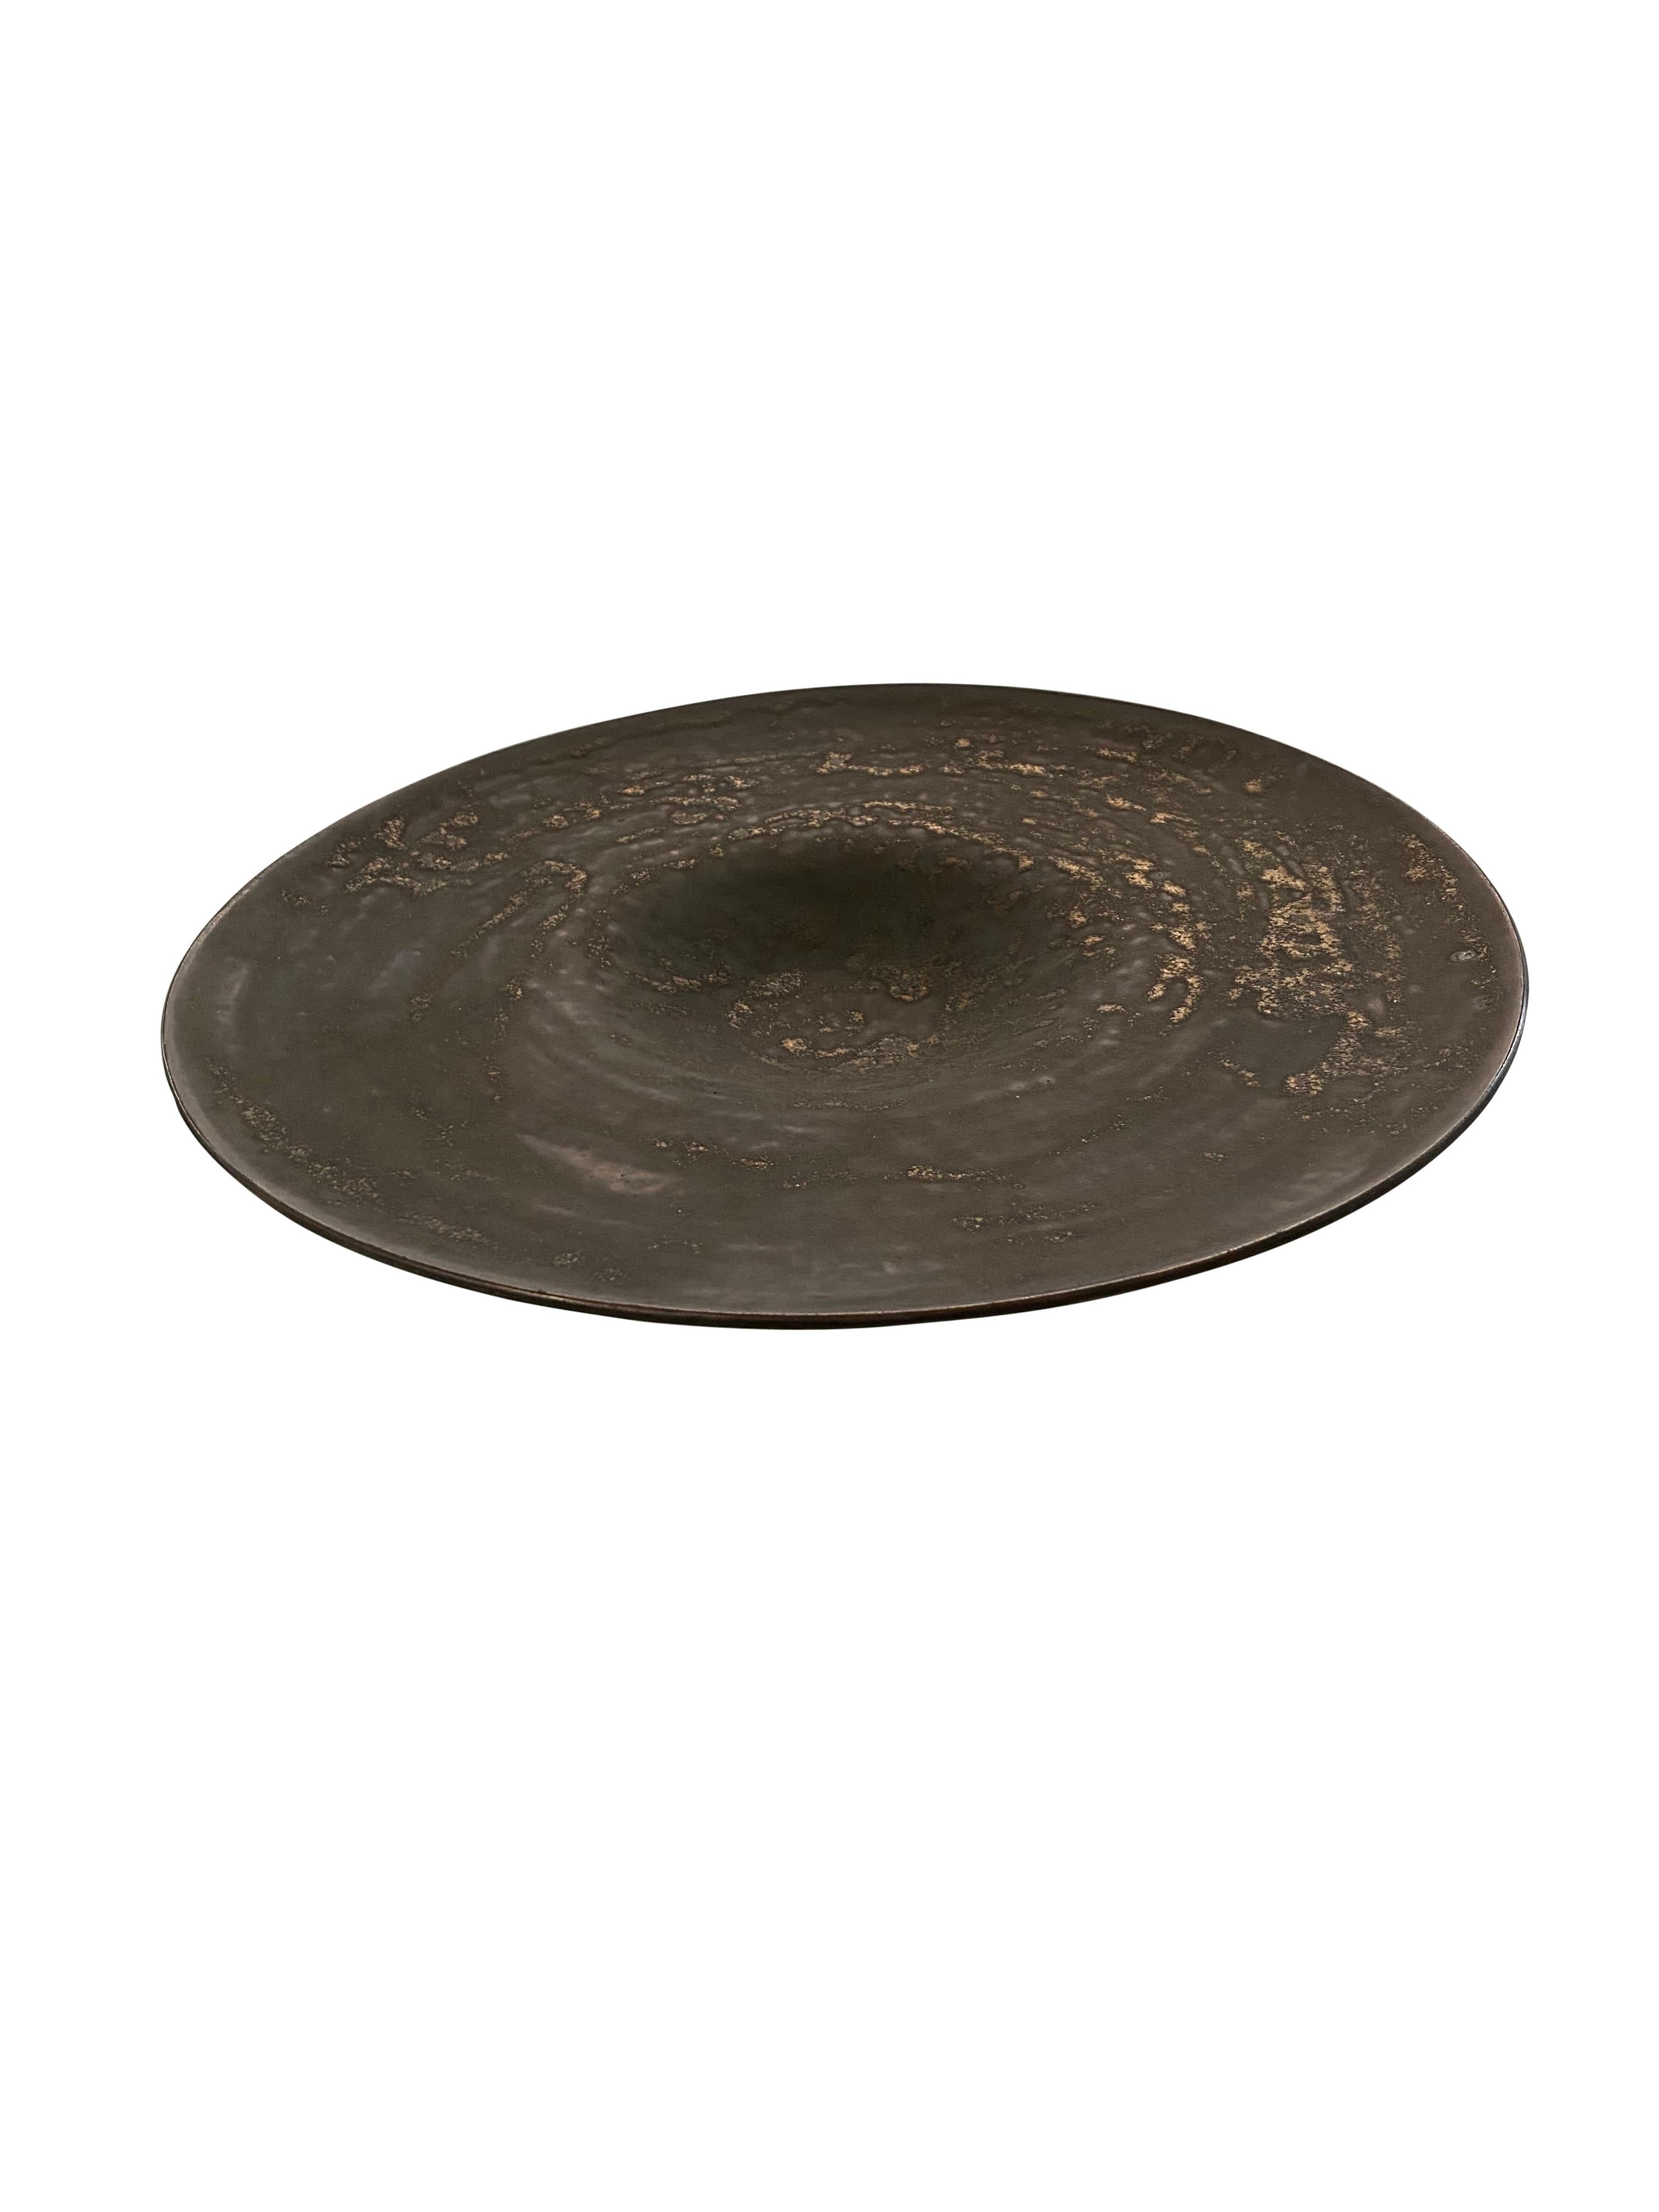 Contemporary American ceramicist Sandi Fellman hammered bronze stoneware platter.
Turquoise back.
Can hold water
One of several pieces from a large collection
Veteran photographer Sandi Fellman's ceramic vessels are an exploration of a new